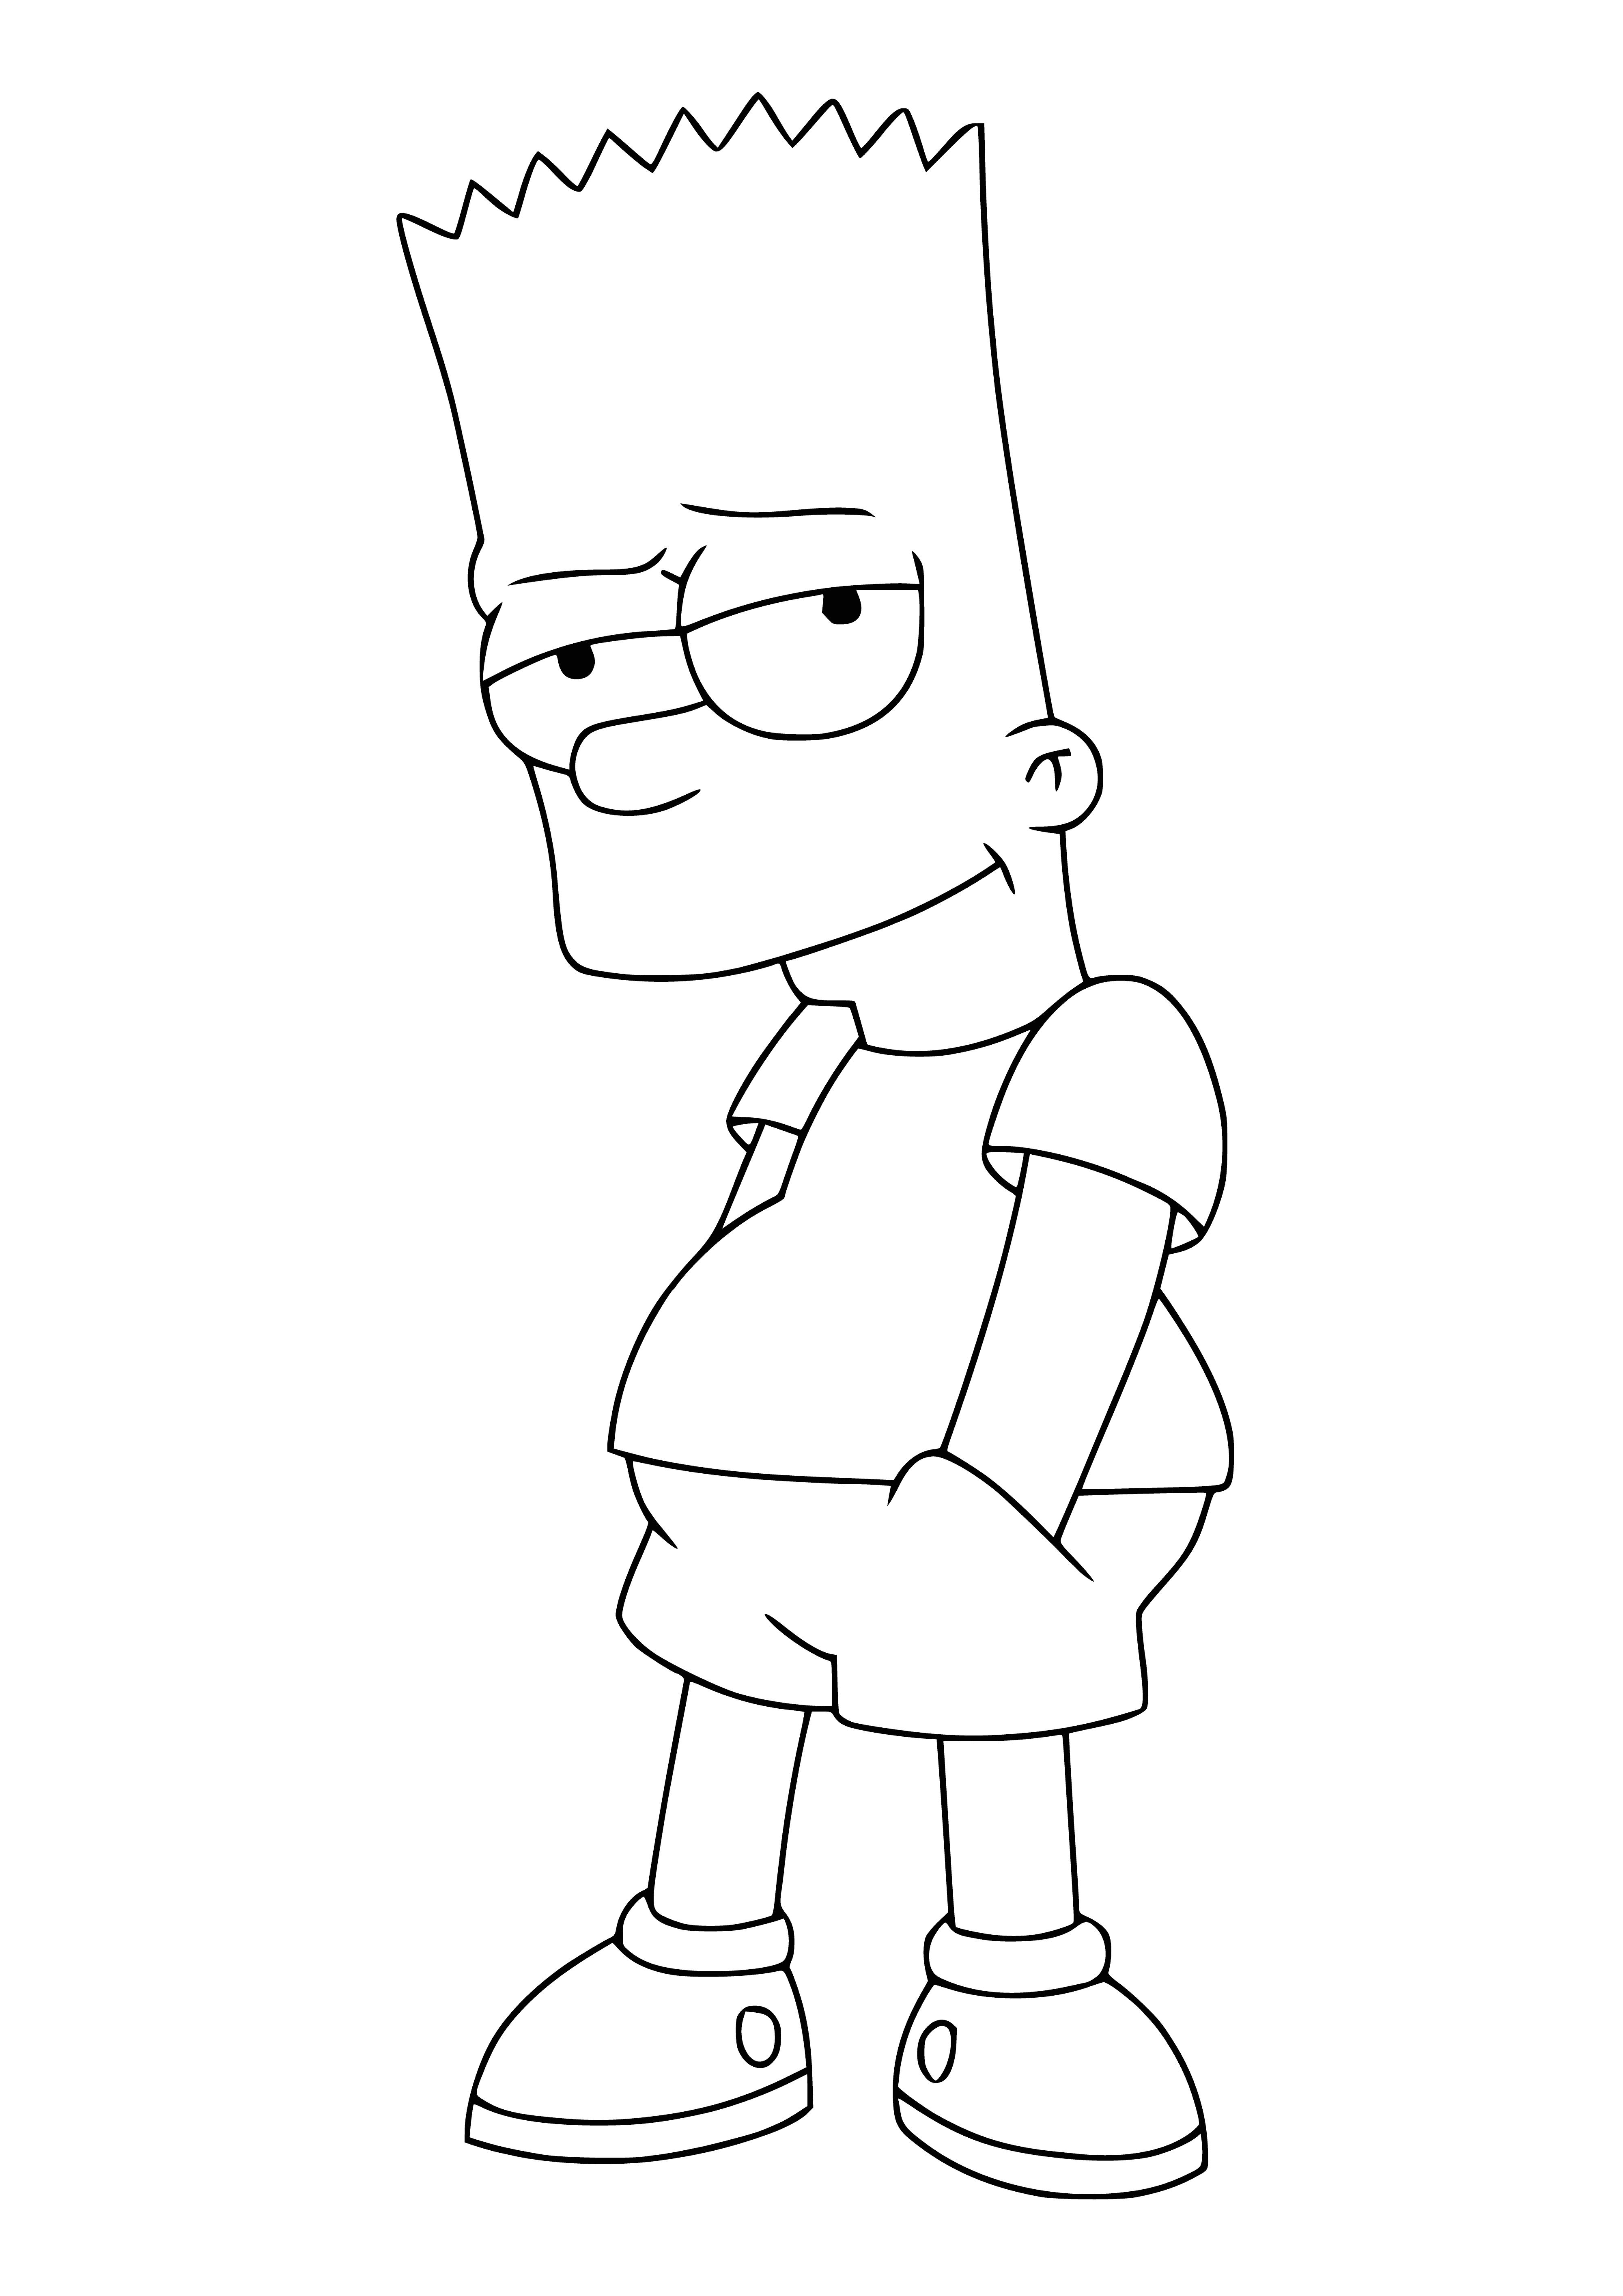 coloring page: Bart Simpson is a mischievous young boy from The Simpsons with yellow skin, blue eyes, & spiked hair wearing a red shirt, blue jeans & white sneakers.